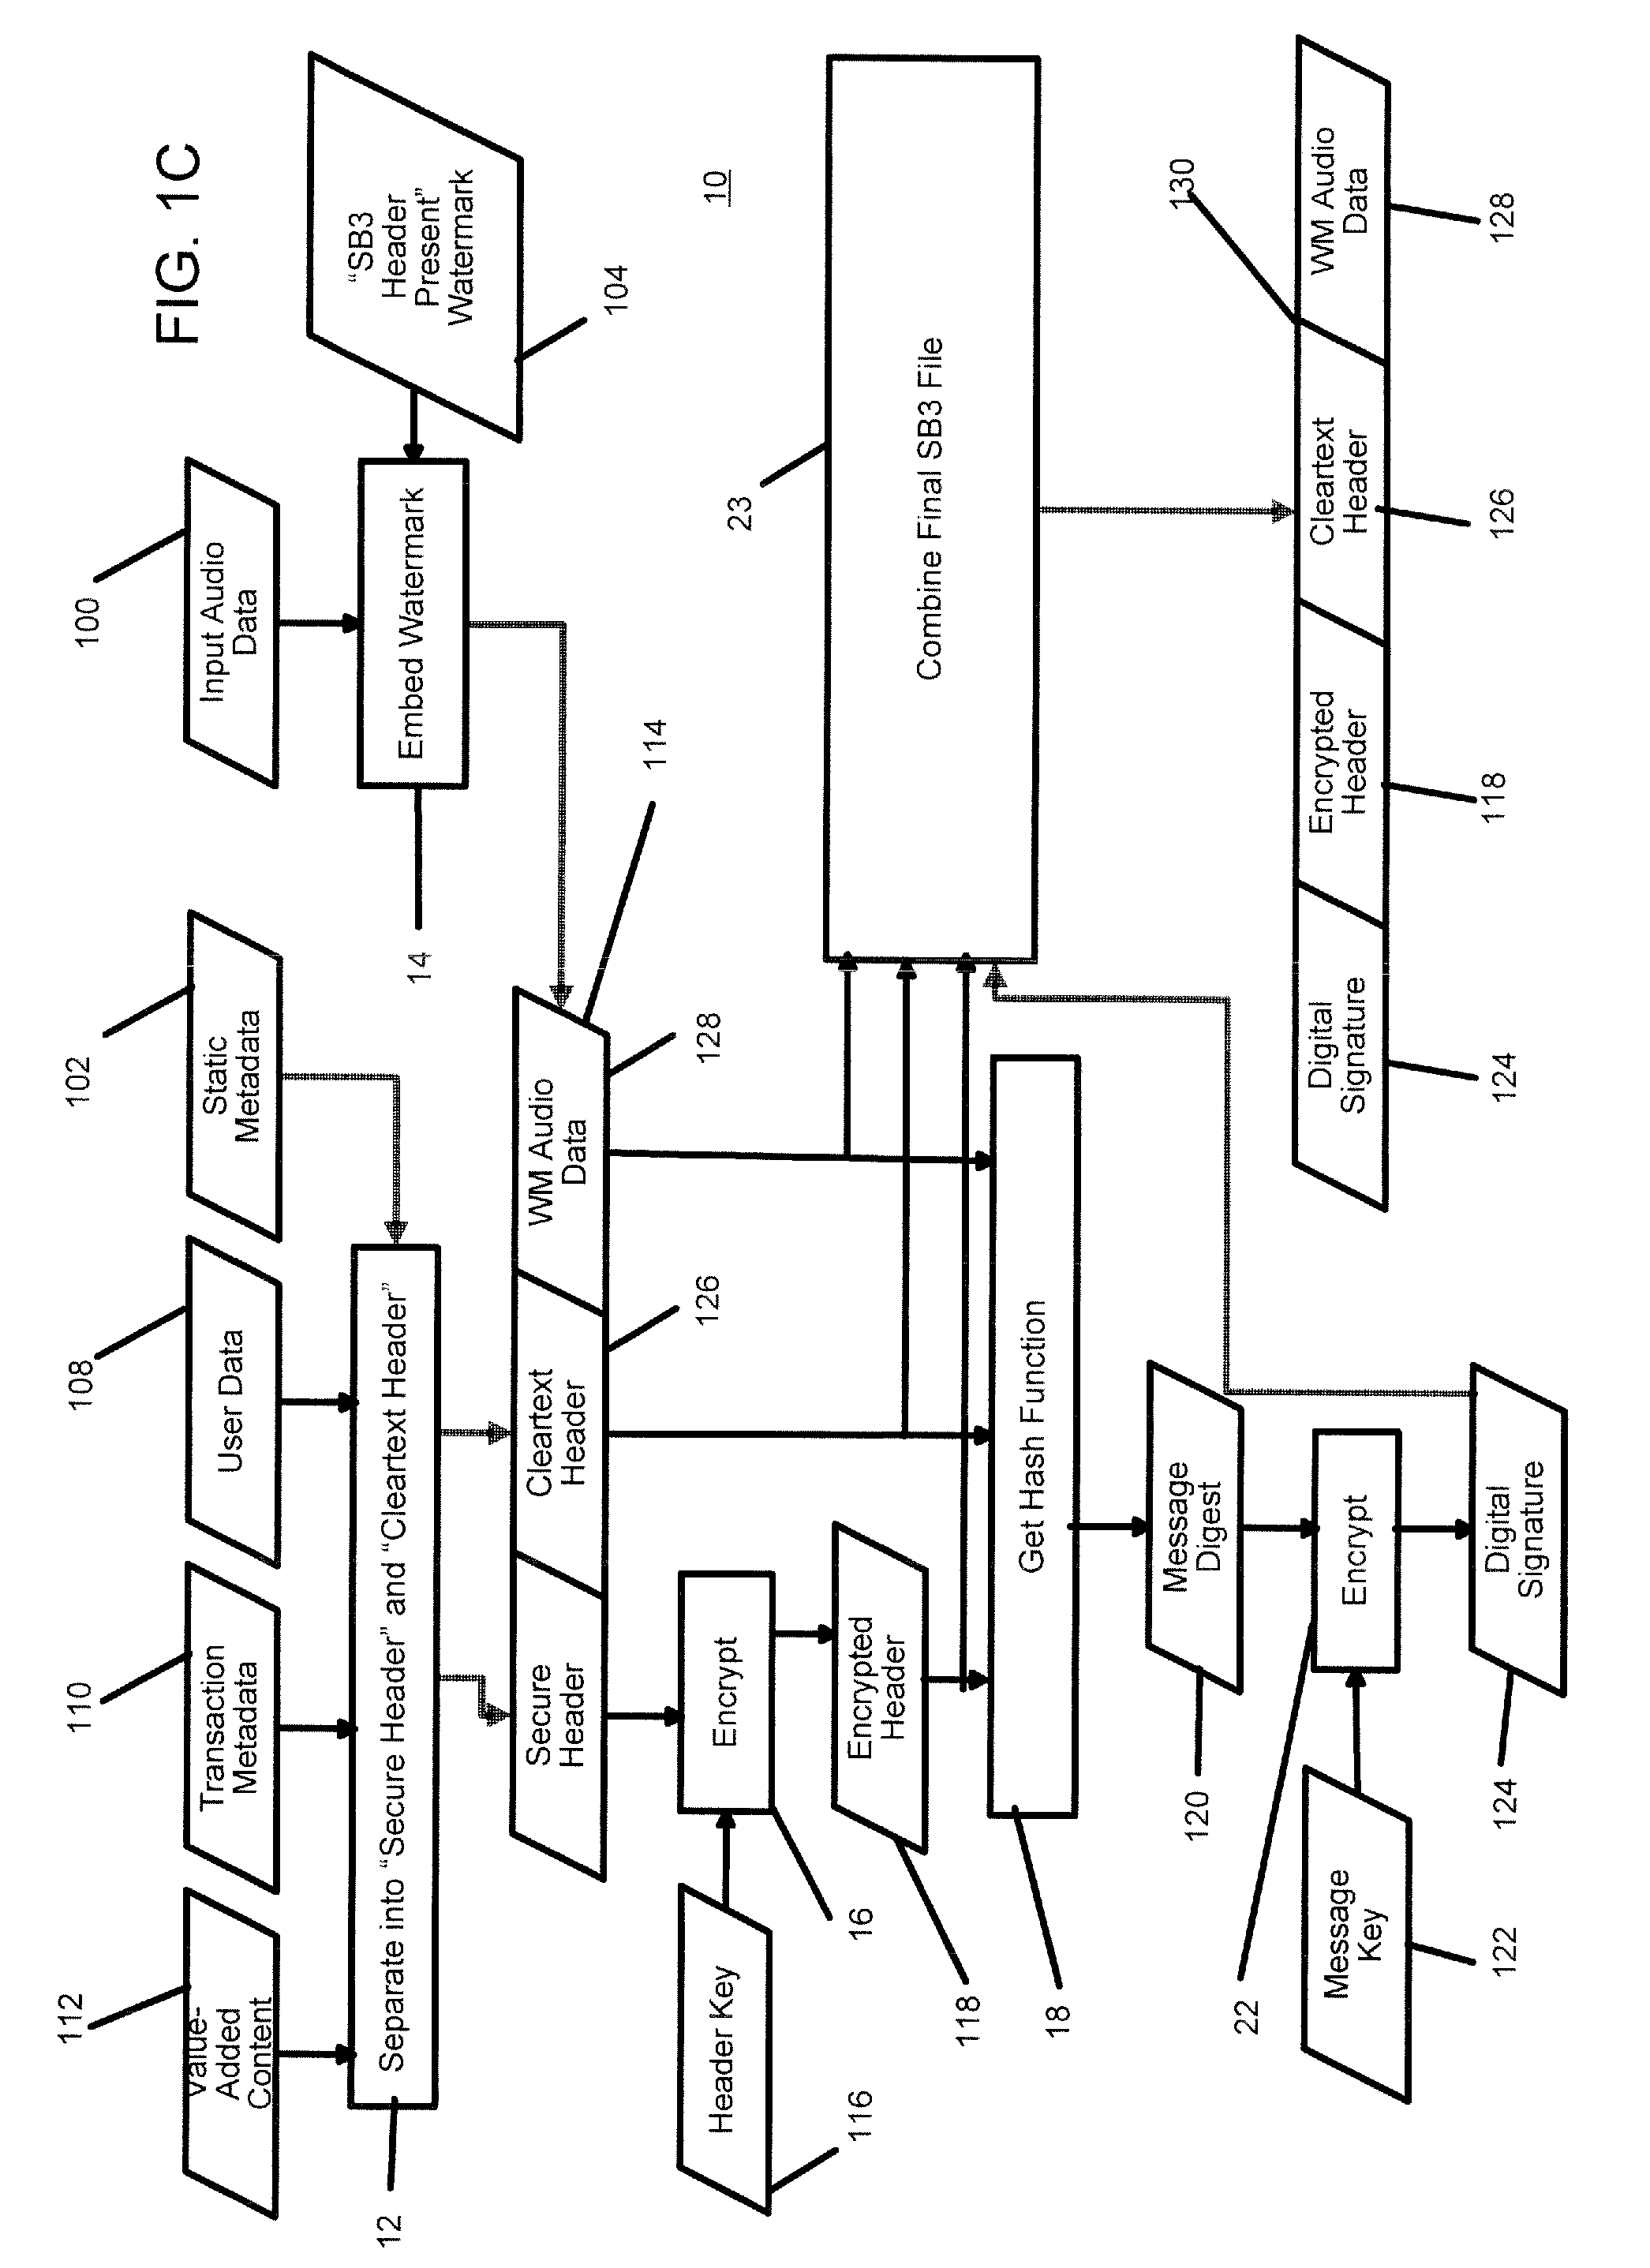 Method and apparatus for distributing digital content